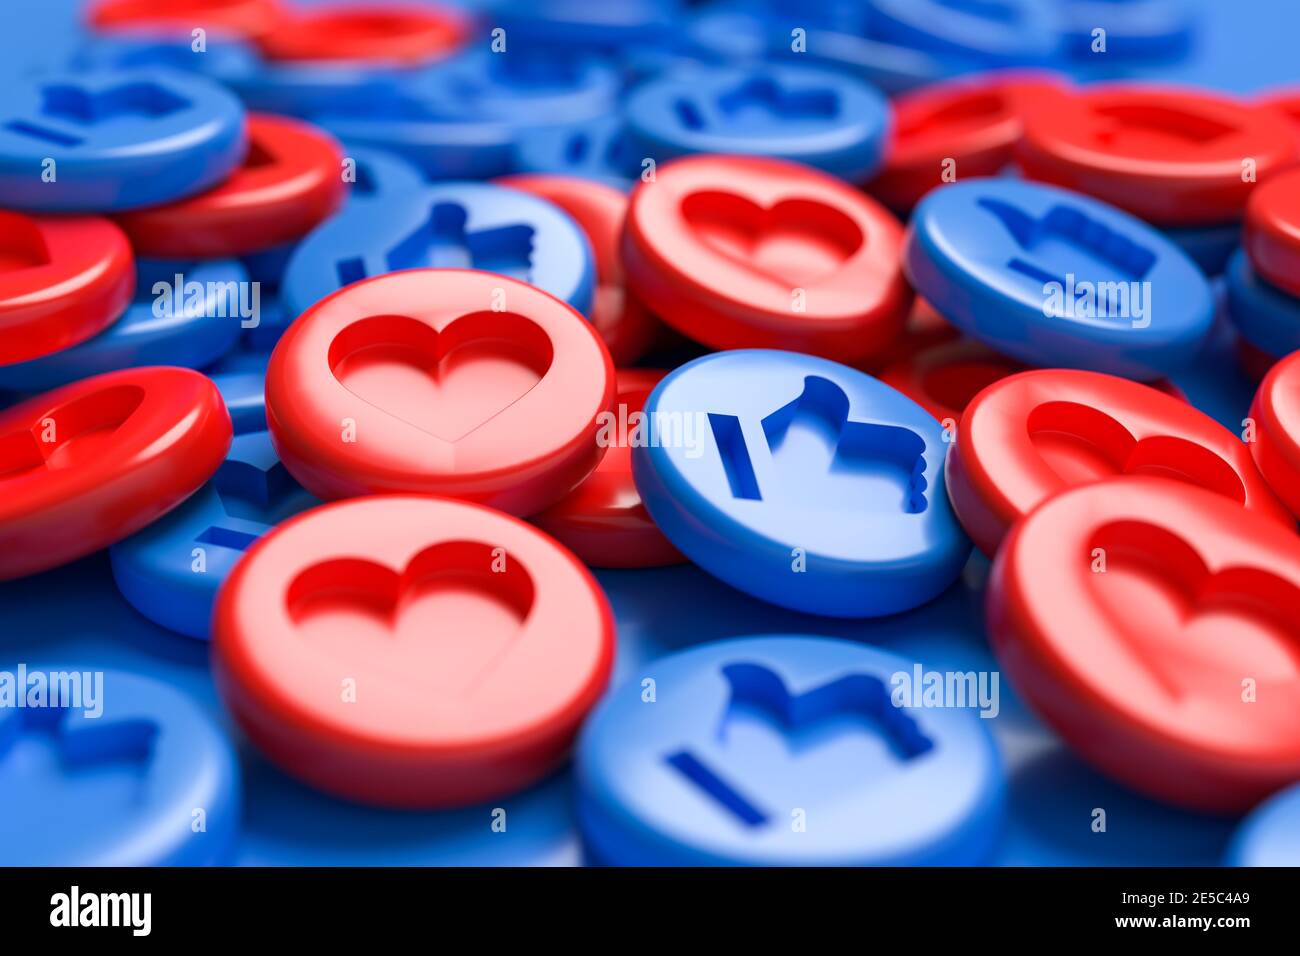 A mix of like buttons with an engraved heart in red and thumbs up in blue on a heap. Blue background. Social Media Concept. Full frame. Stock Photo